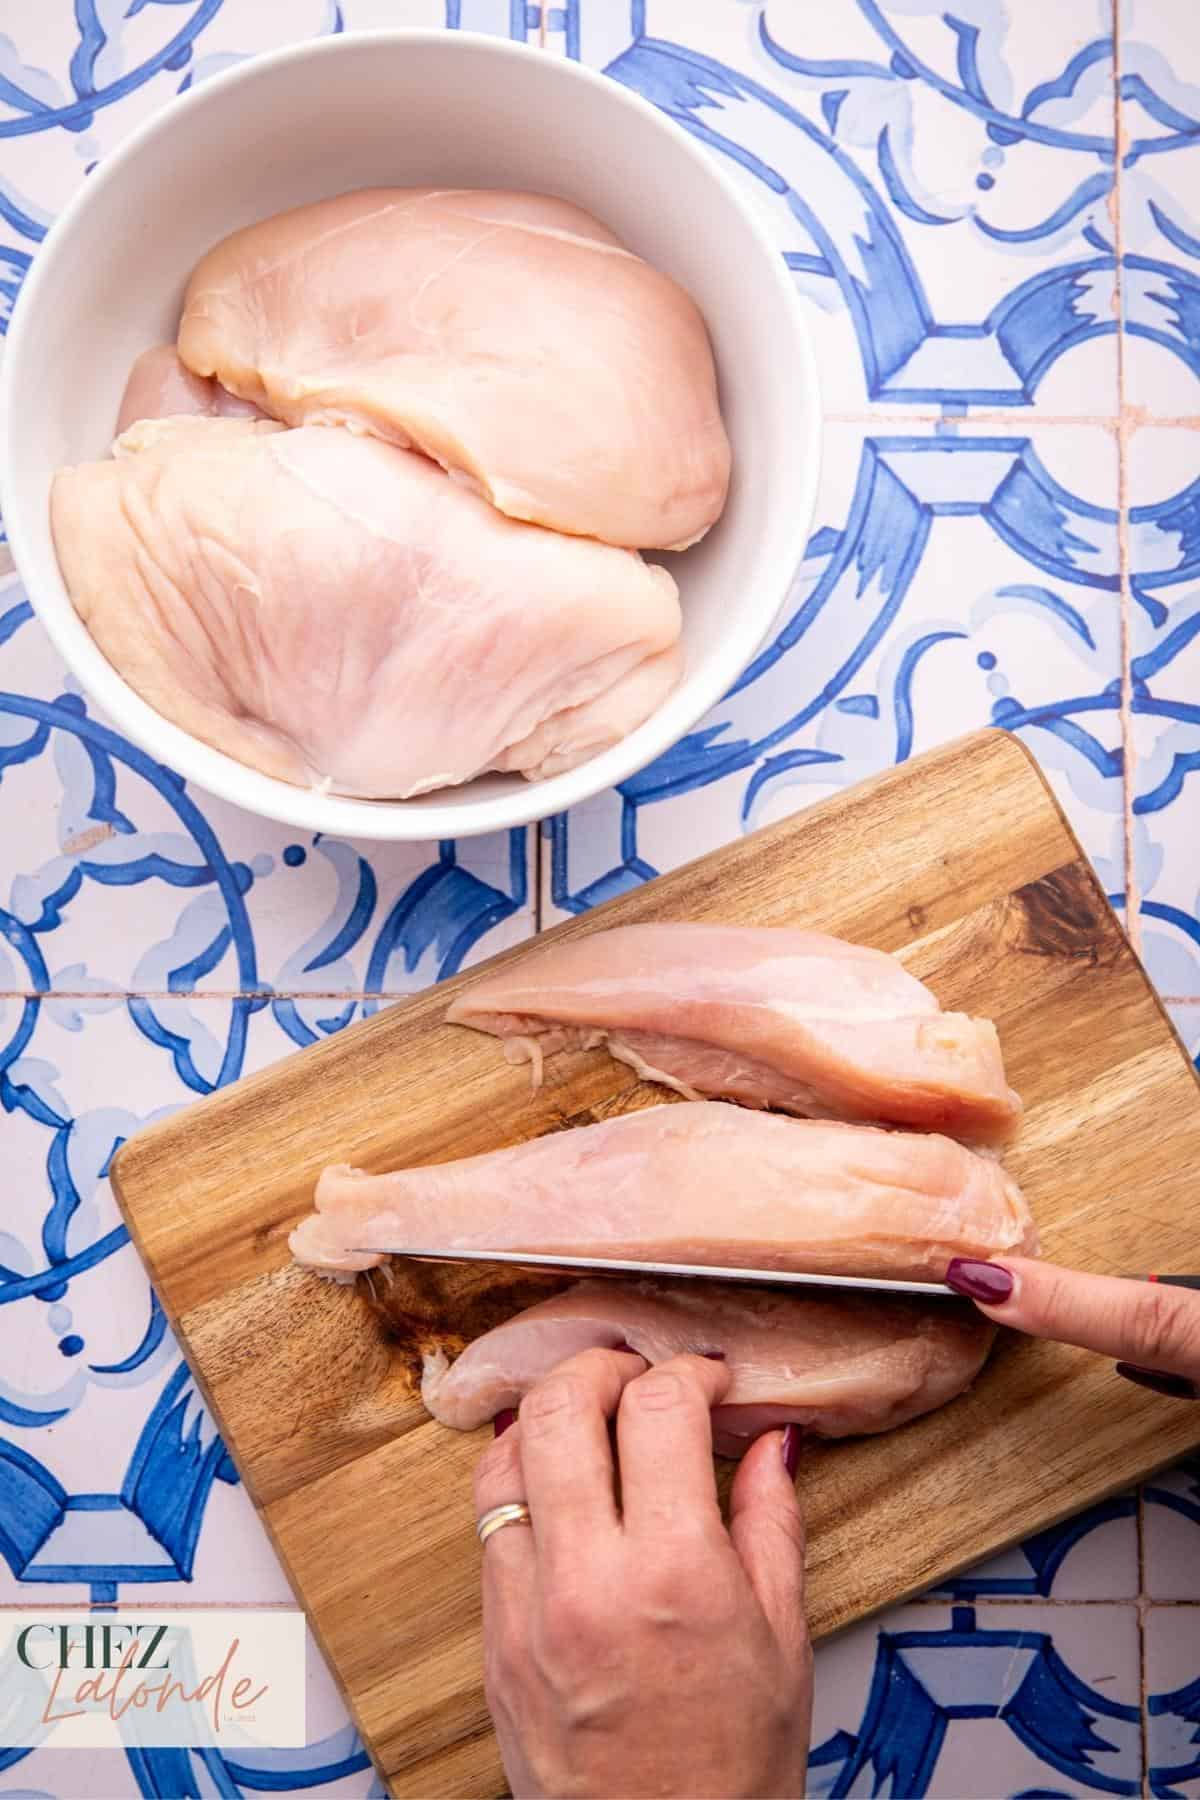 Unpack the chicken breasts and give them a quick rinse under cold water. Gently pat them dry using clean paper towels. Slice the chicken lengthwise.